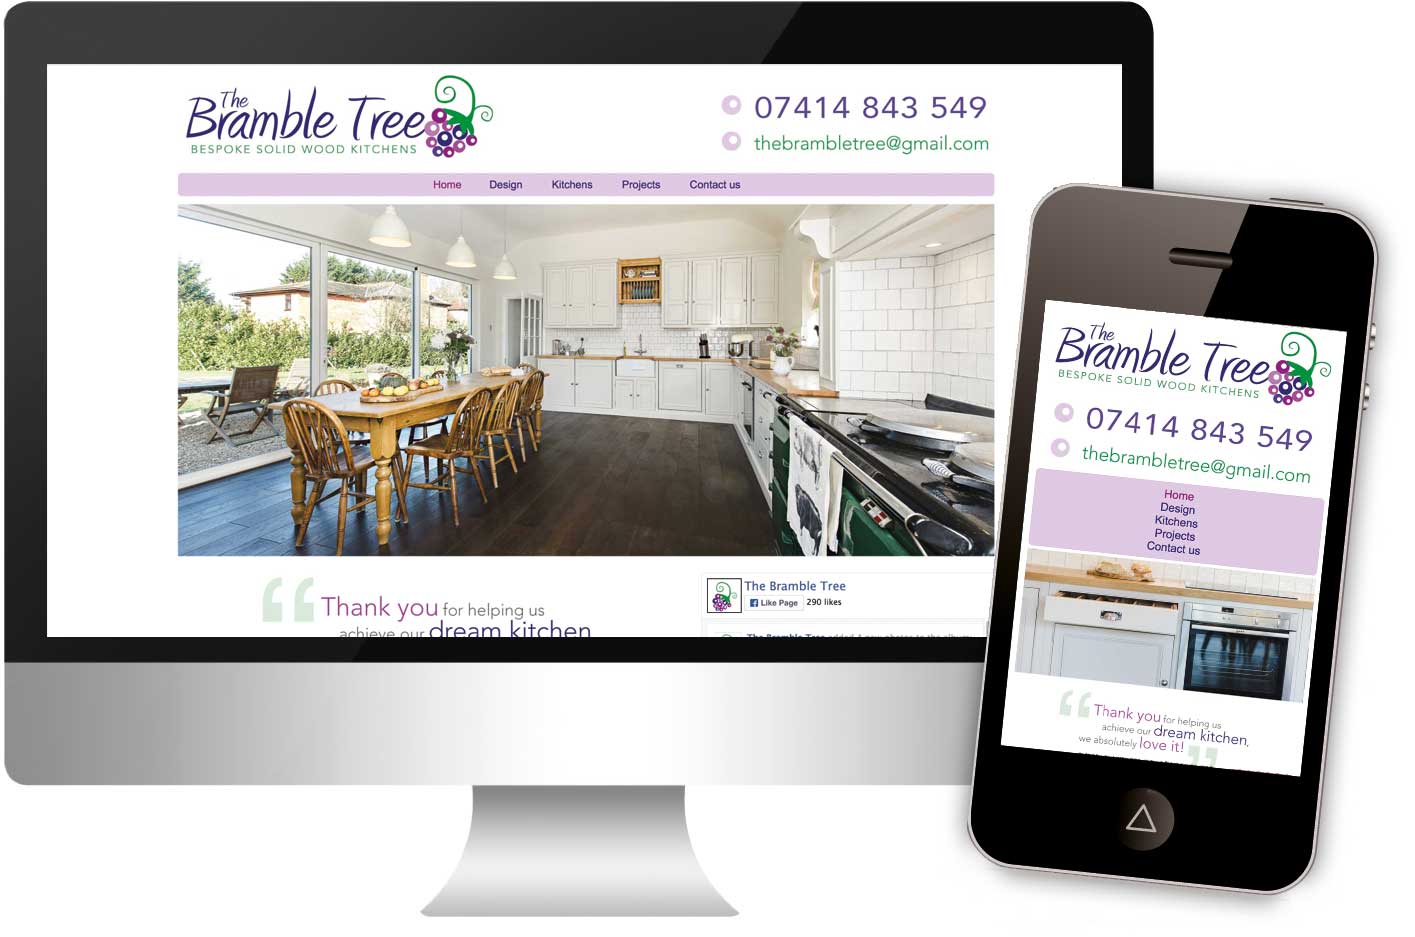 Bramble Tree Kitchens website, launched in April 2016, responsive web design.